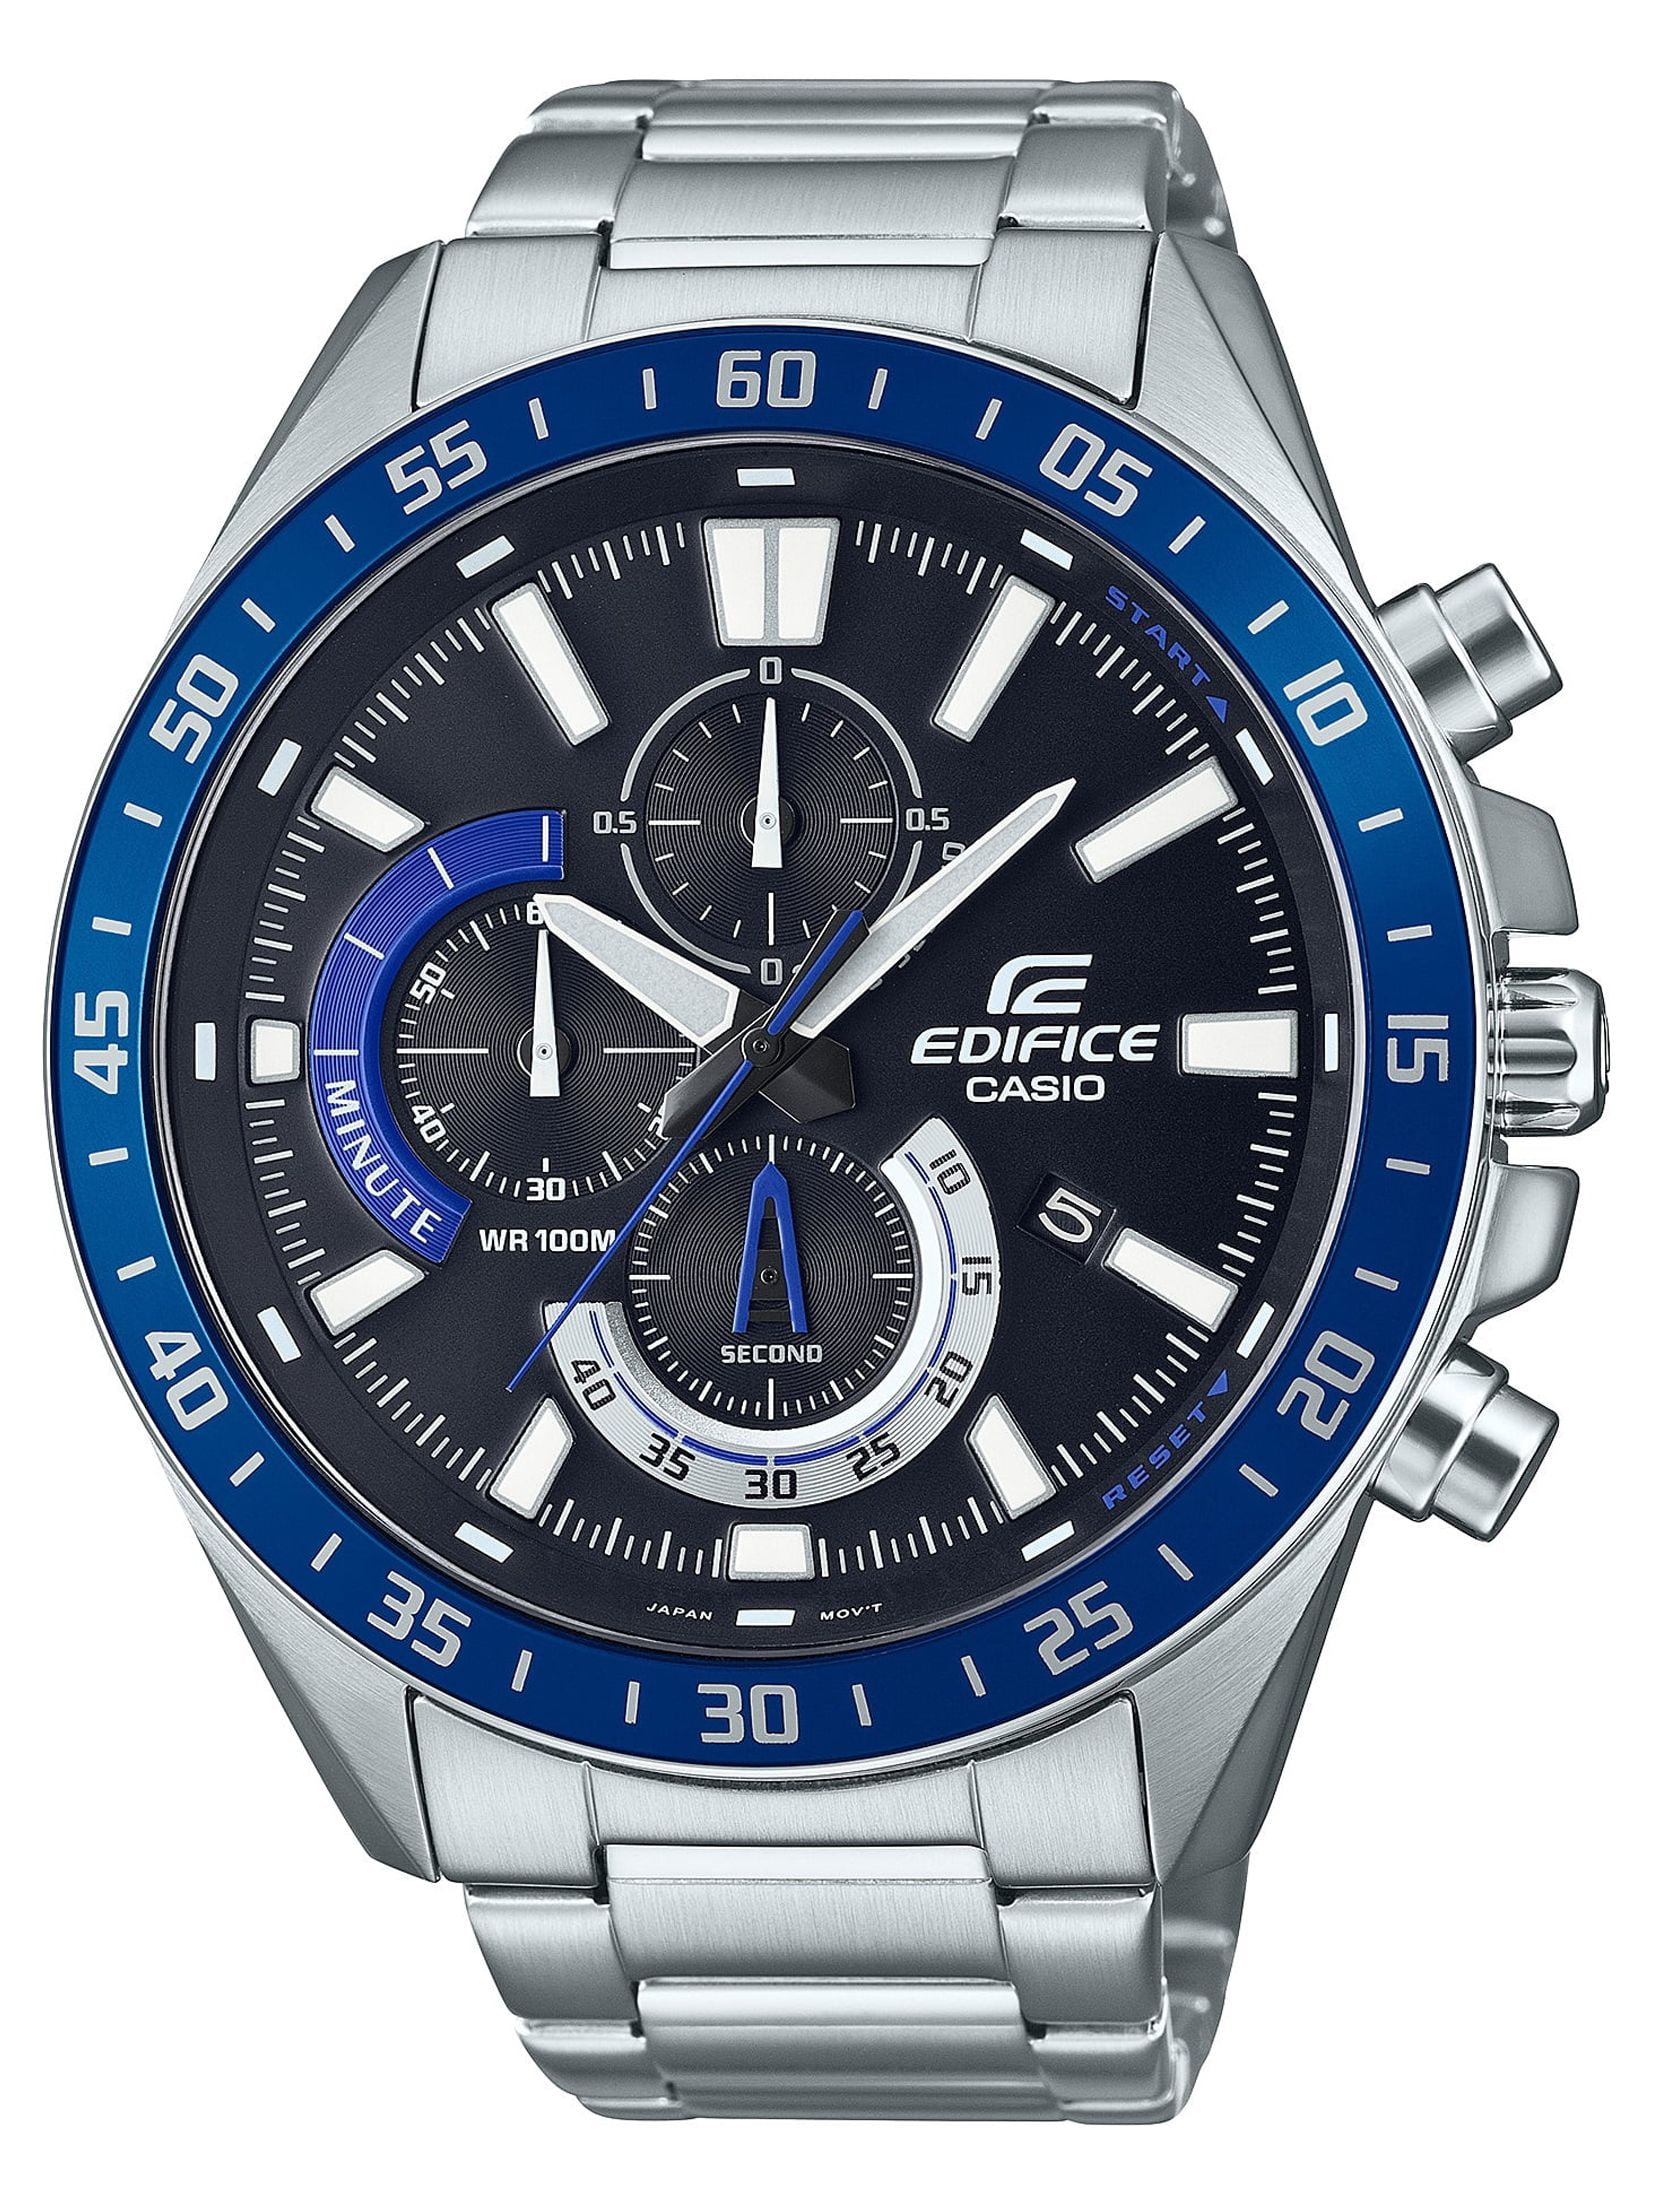 Casio Men's Edifice Chronograph Stainless Steel Watch EFV620D-1A2V